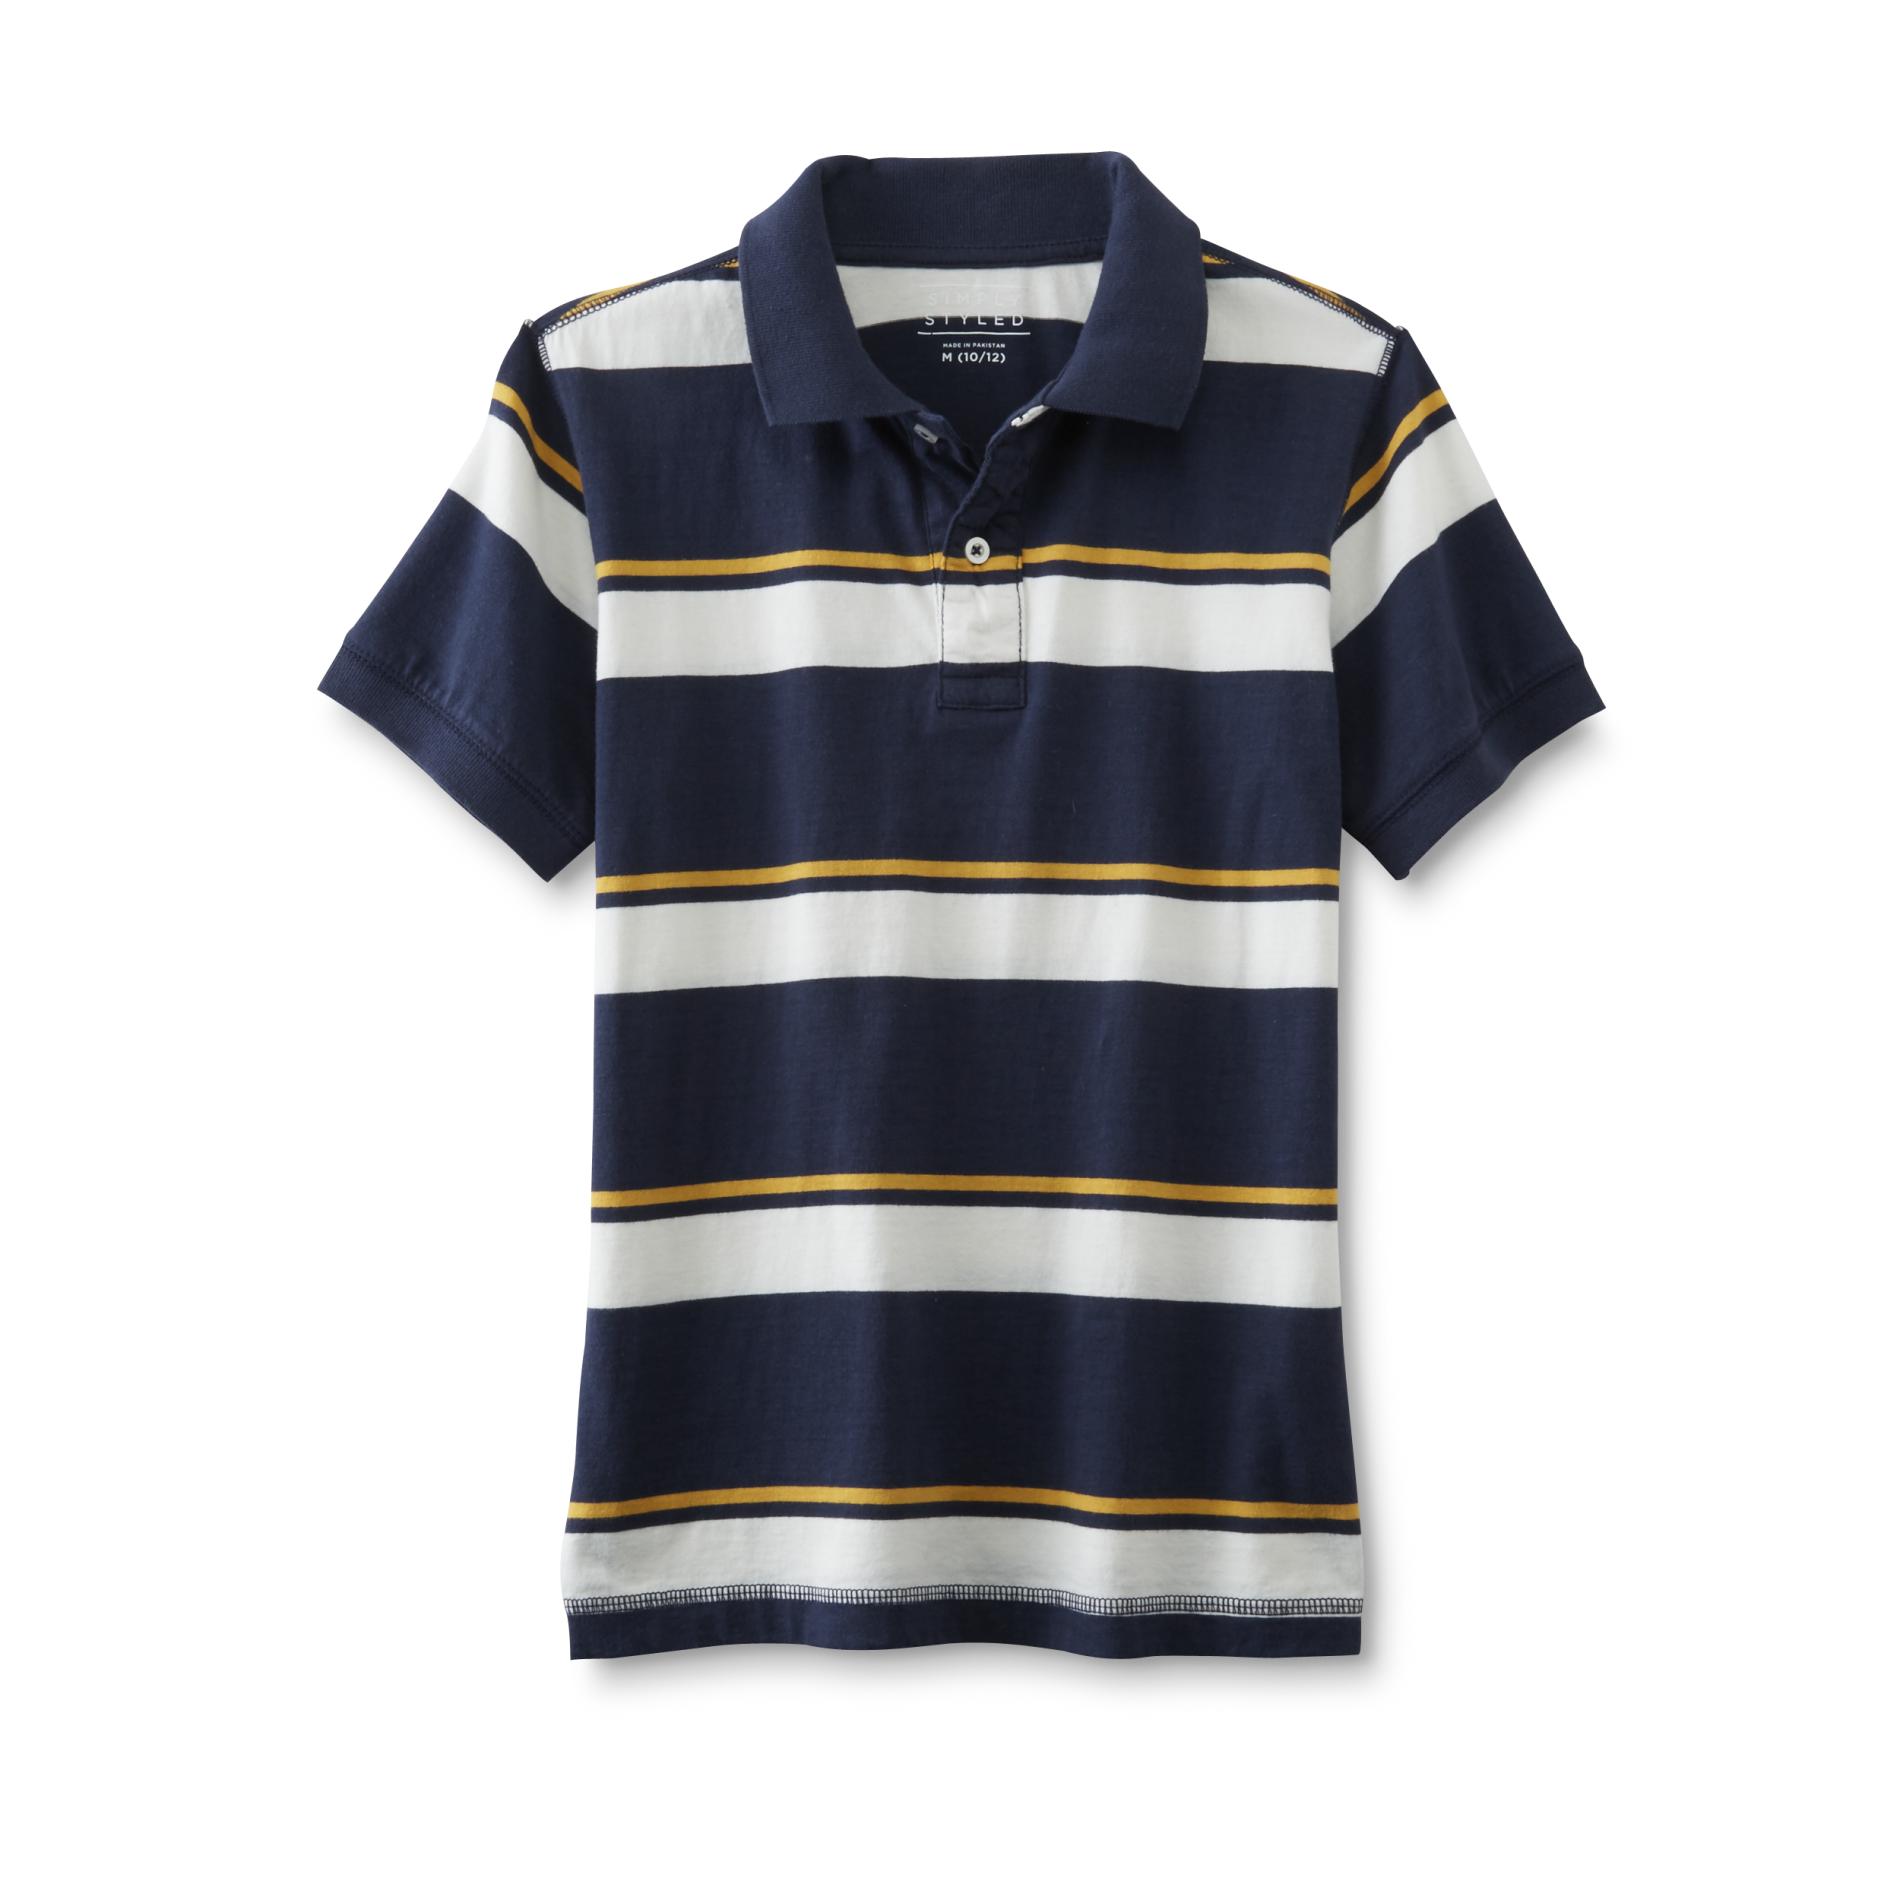 Simply Styled Boy's Polo Shirt - Striped